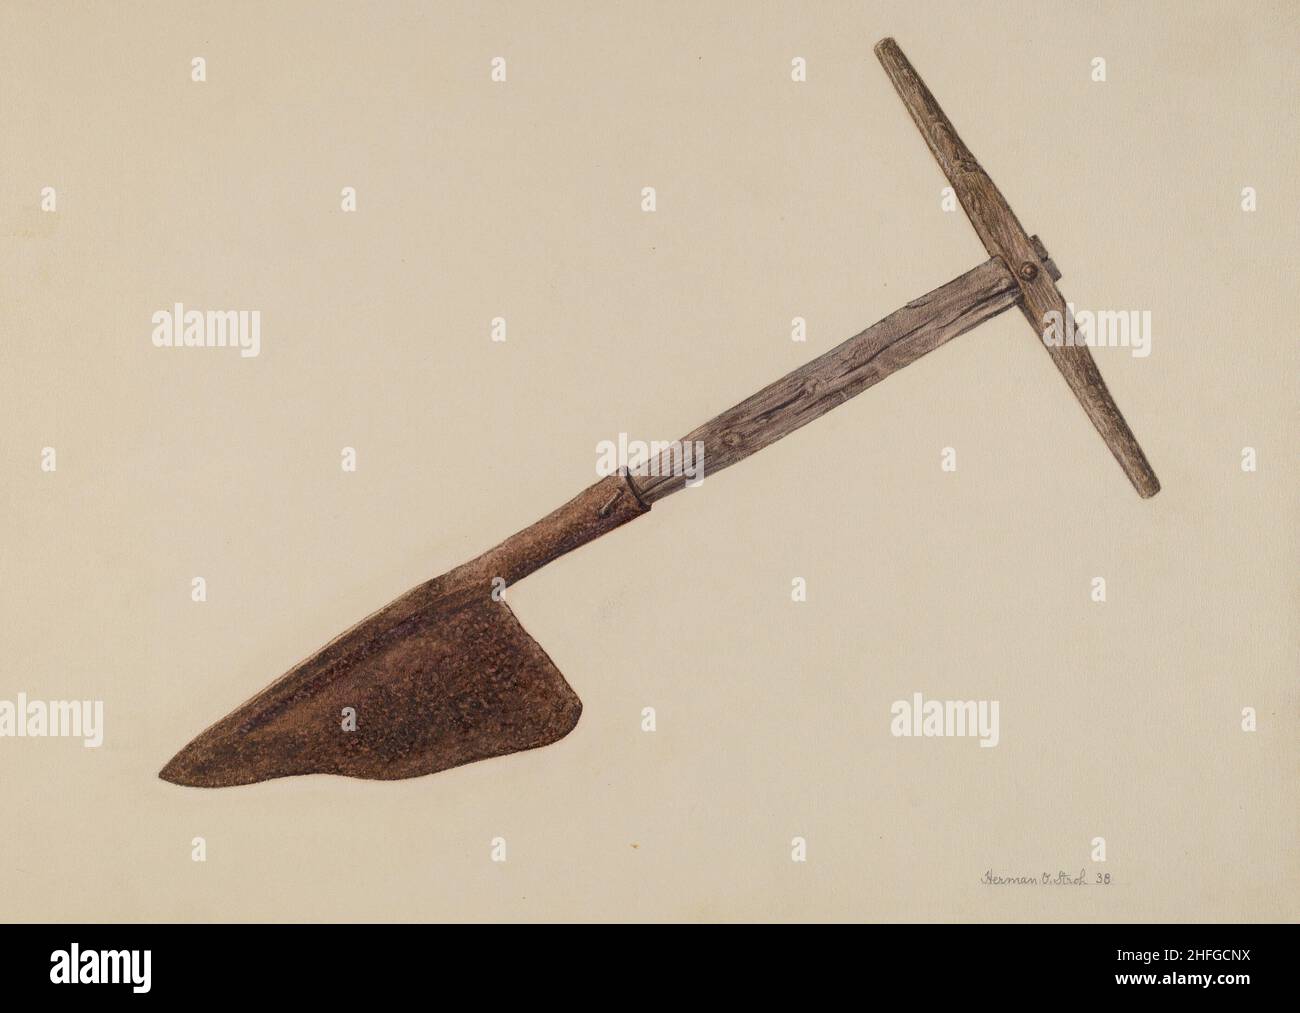 Sold at Auction: Antique Broad Axe and Hay Knife - Wheeling